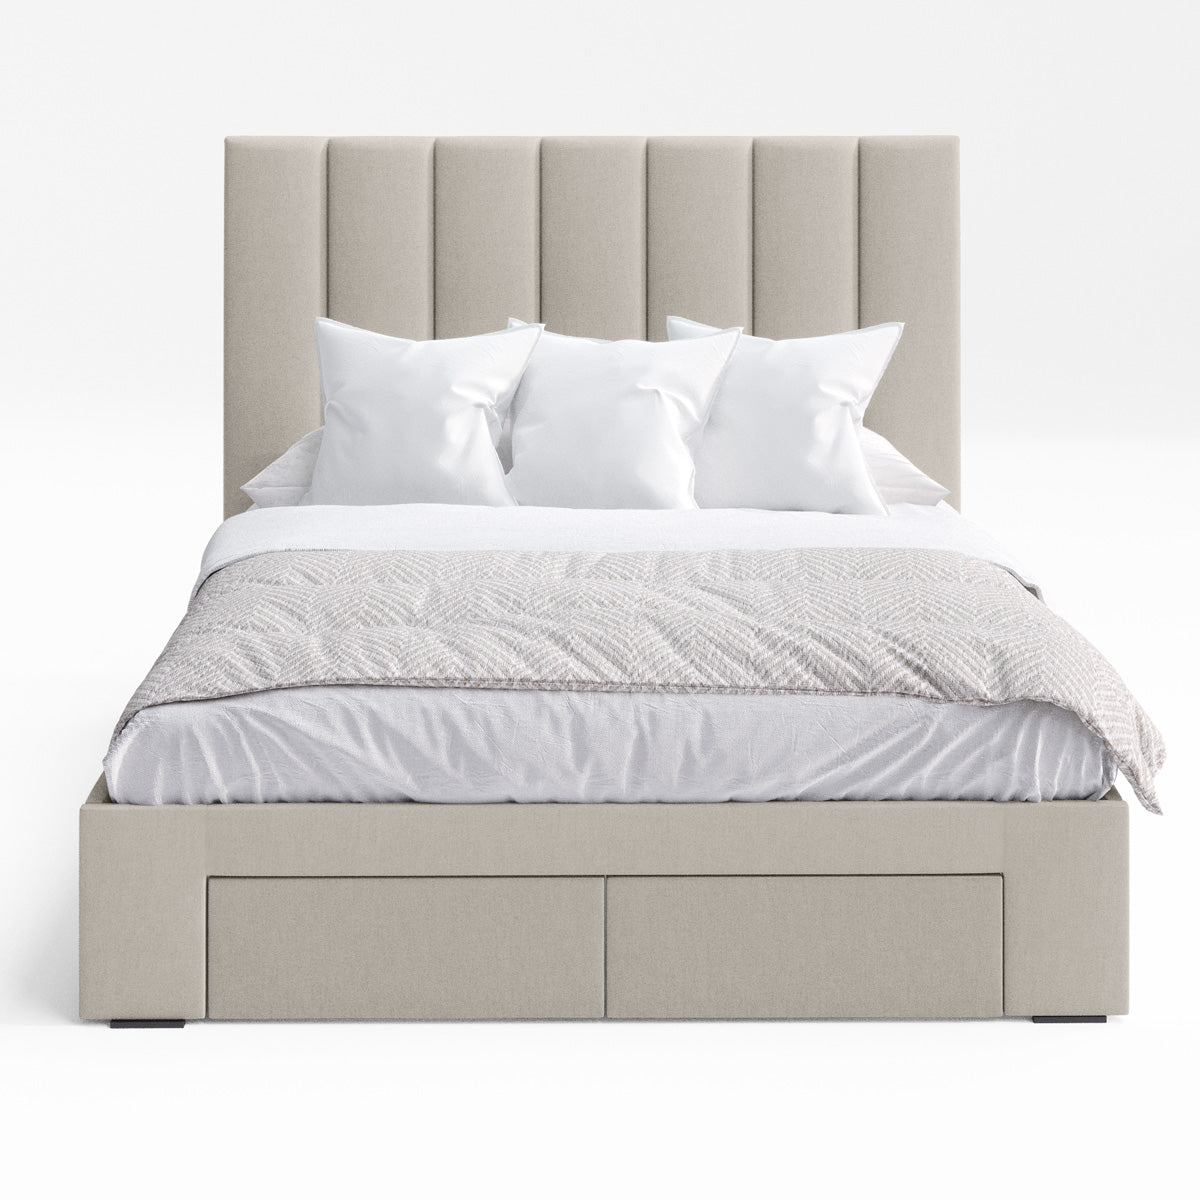 Celine Bed Frame with Four Storage Drawers (Natural Beige Fabric)